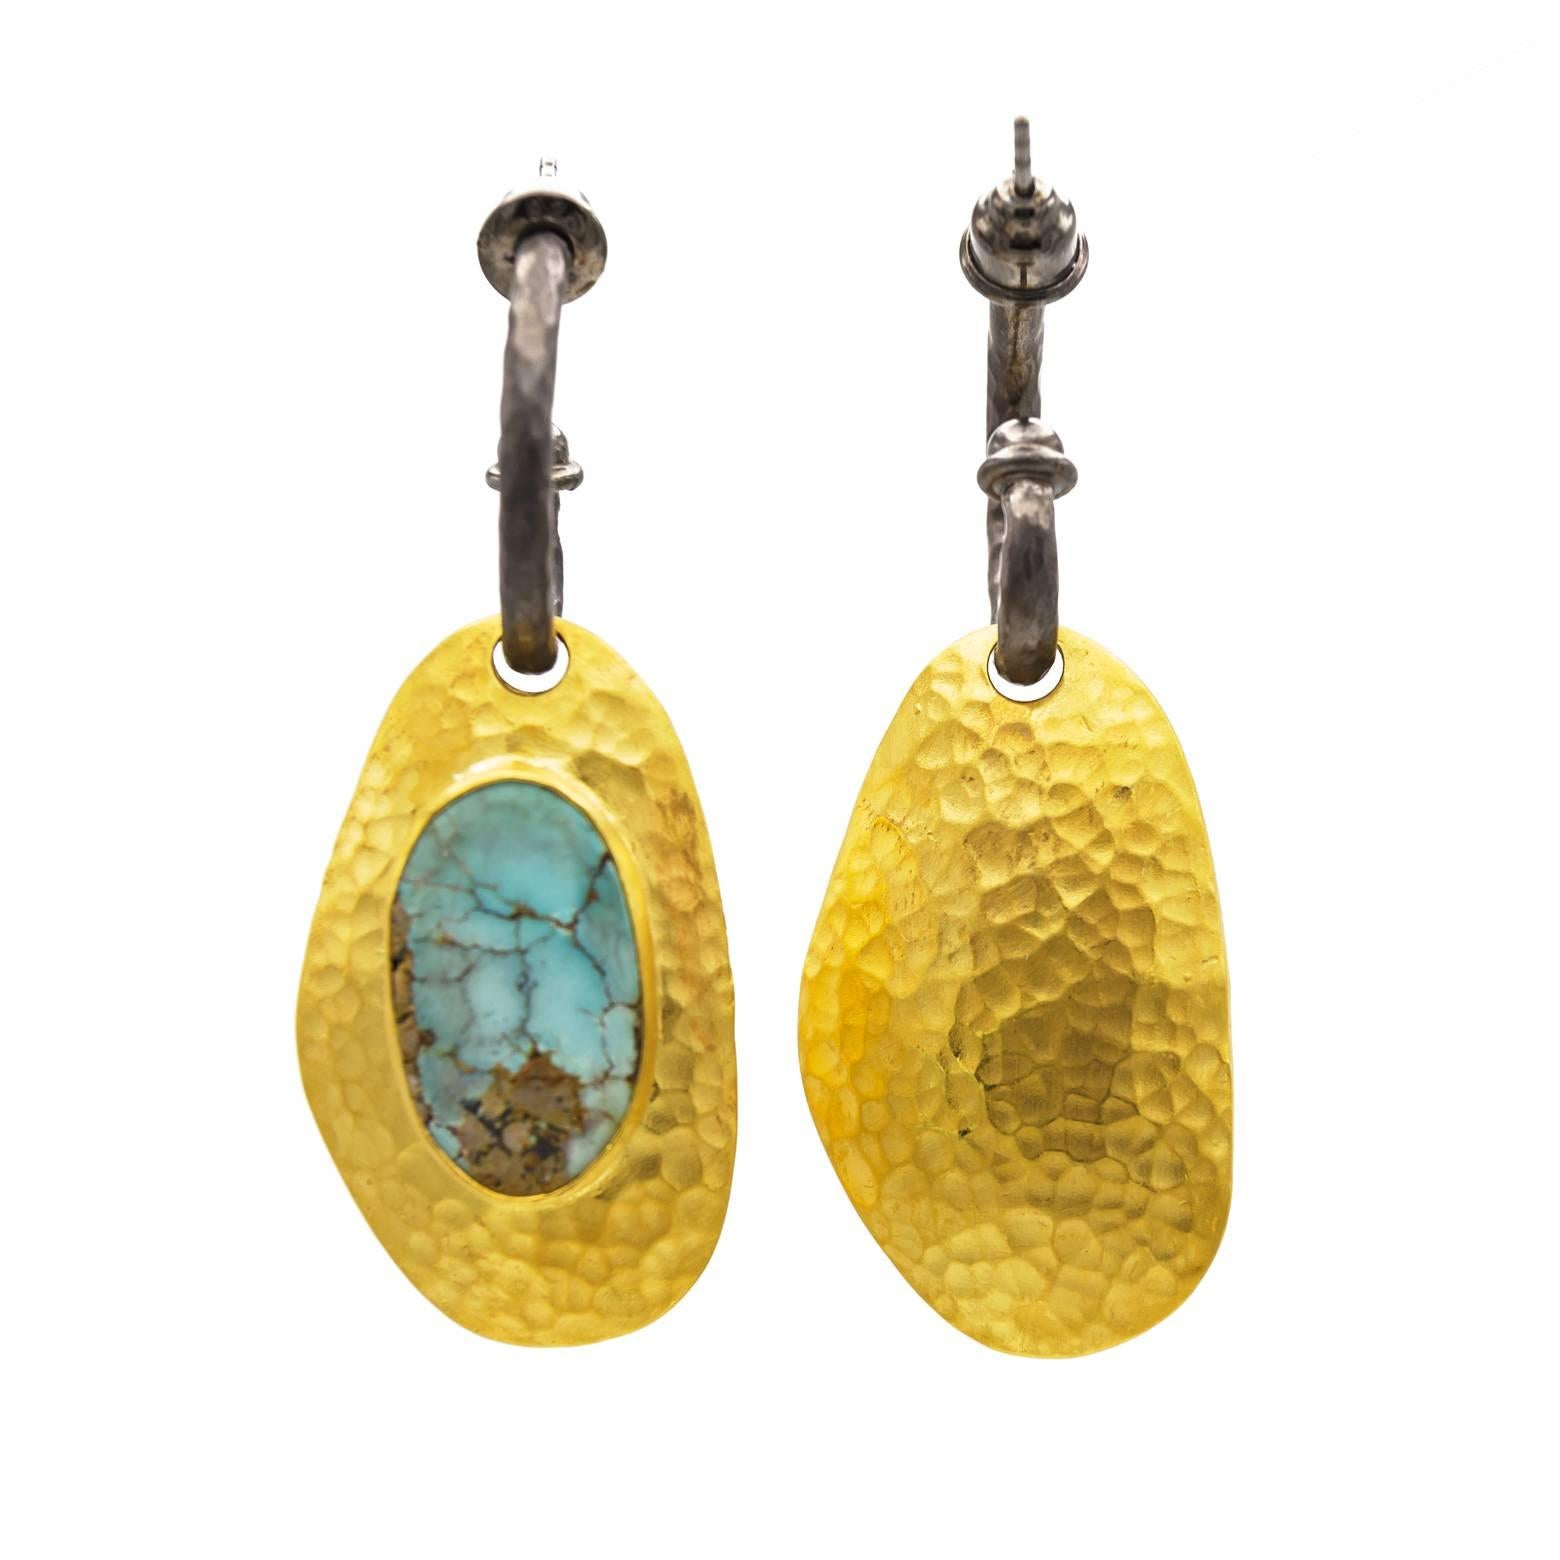 These pieces of Persian Turquoise are intricate with the varying shades of light blue and teal it looks as if you're staring at islands in paradise. Complimented by the hammered extra thick gold vermeil and oxidized sterling silver these earrings